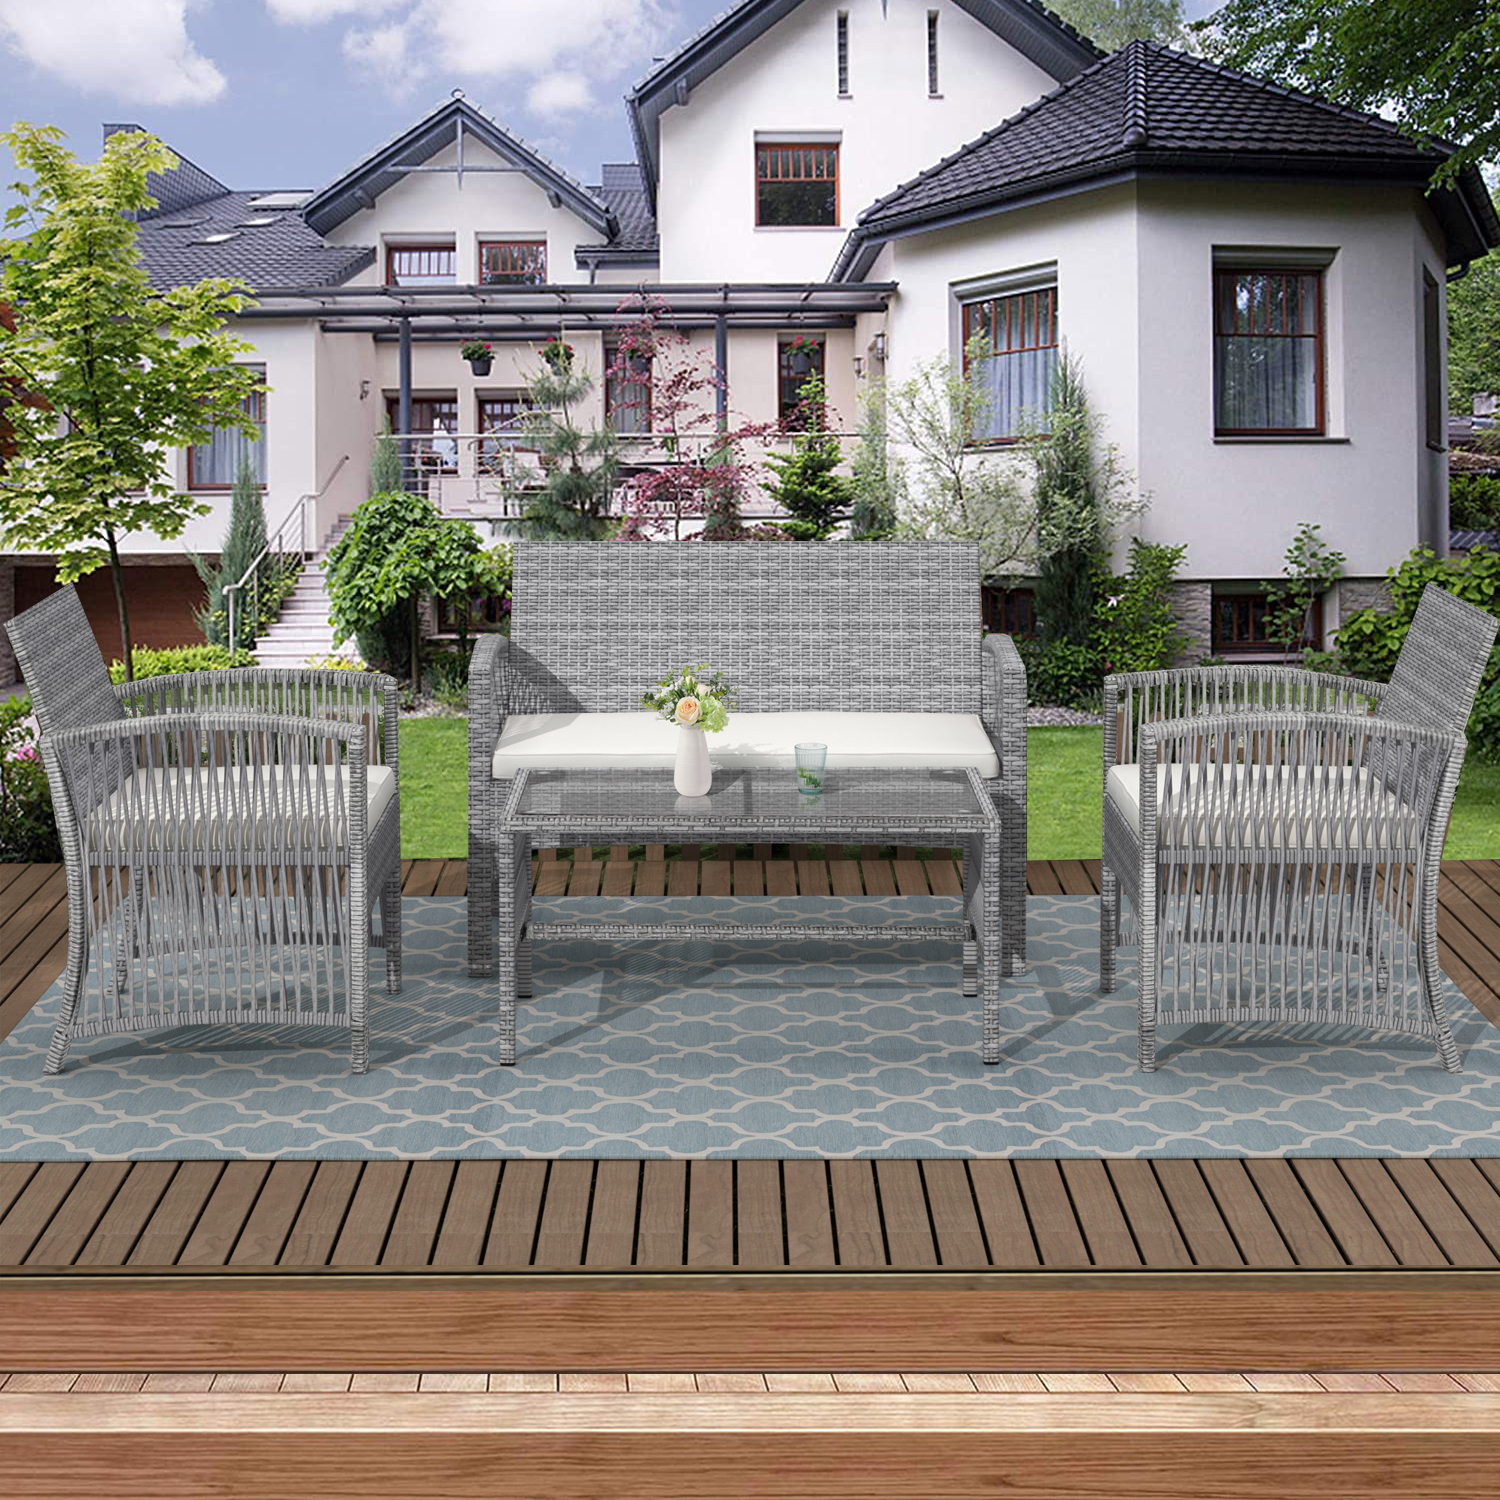 Patio Outdoor Furniture Sets, UHOMEPRO 4 Pieces PE Rattan Garden Furniture Wicker Chairs Set with Coffee Table, Outdoor Conversation Sets, Patio Dining Set for Backyard Poolside Porch, Gray, W7764 - image 2 of 11